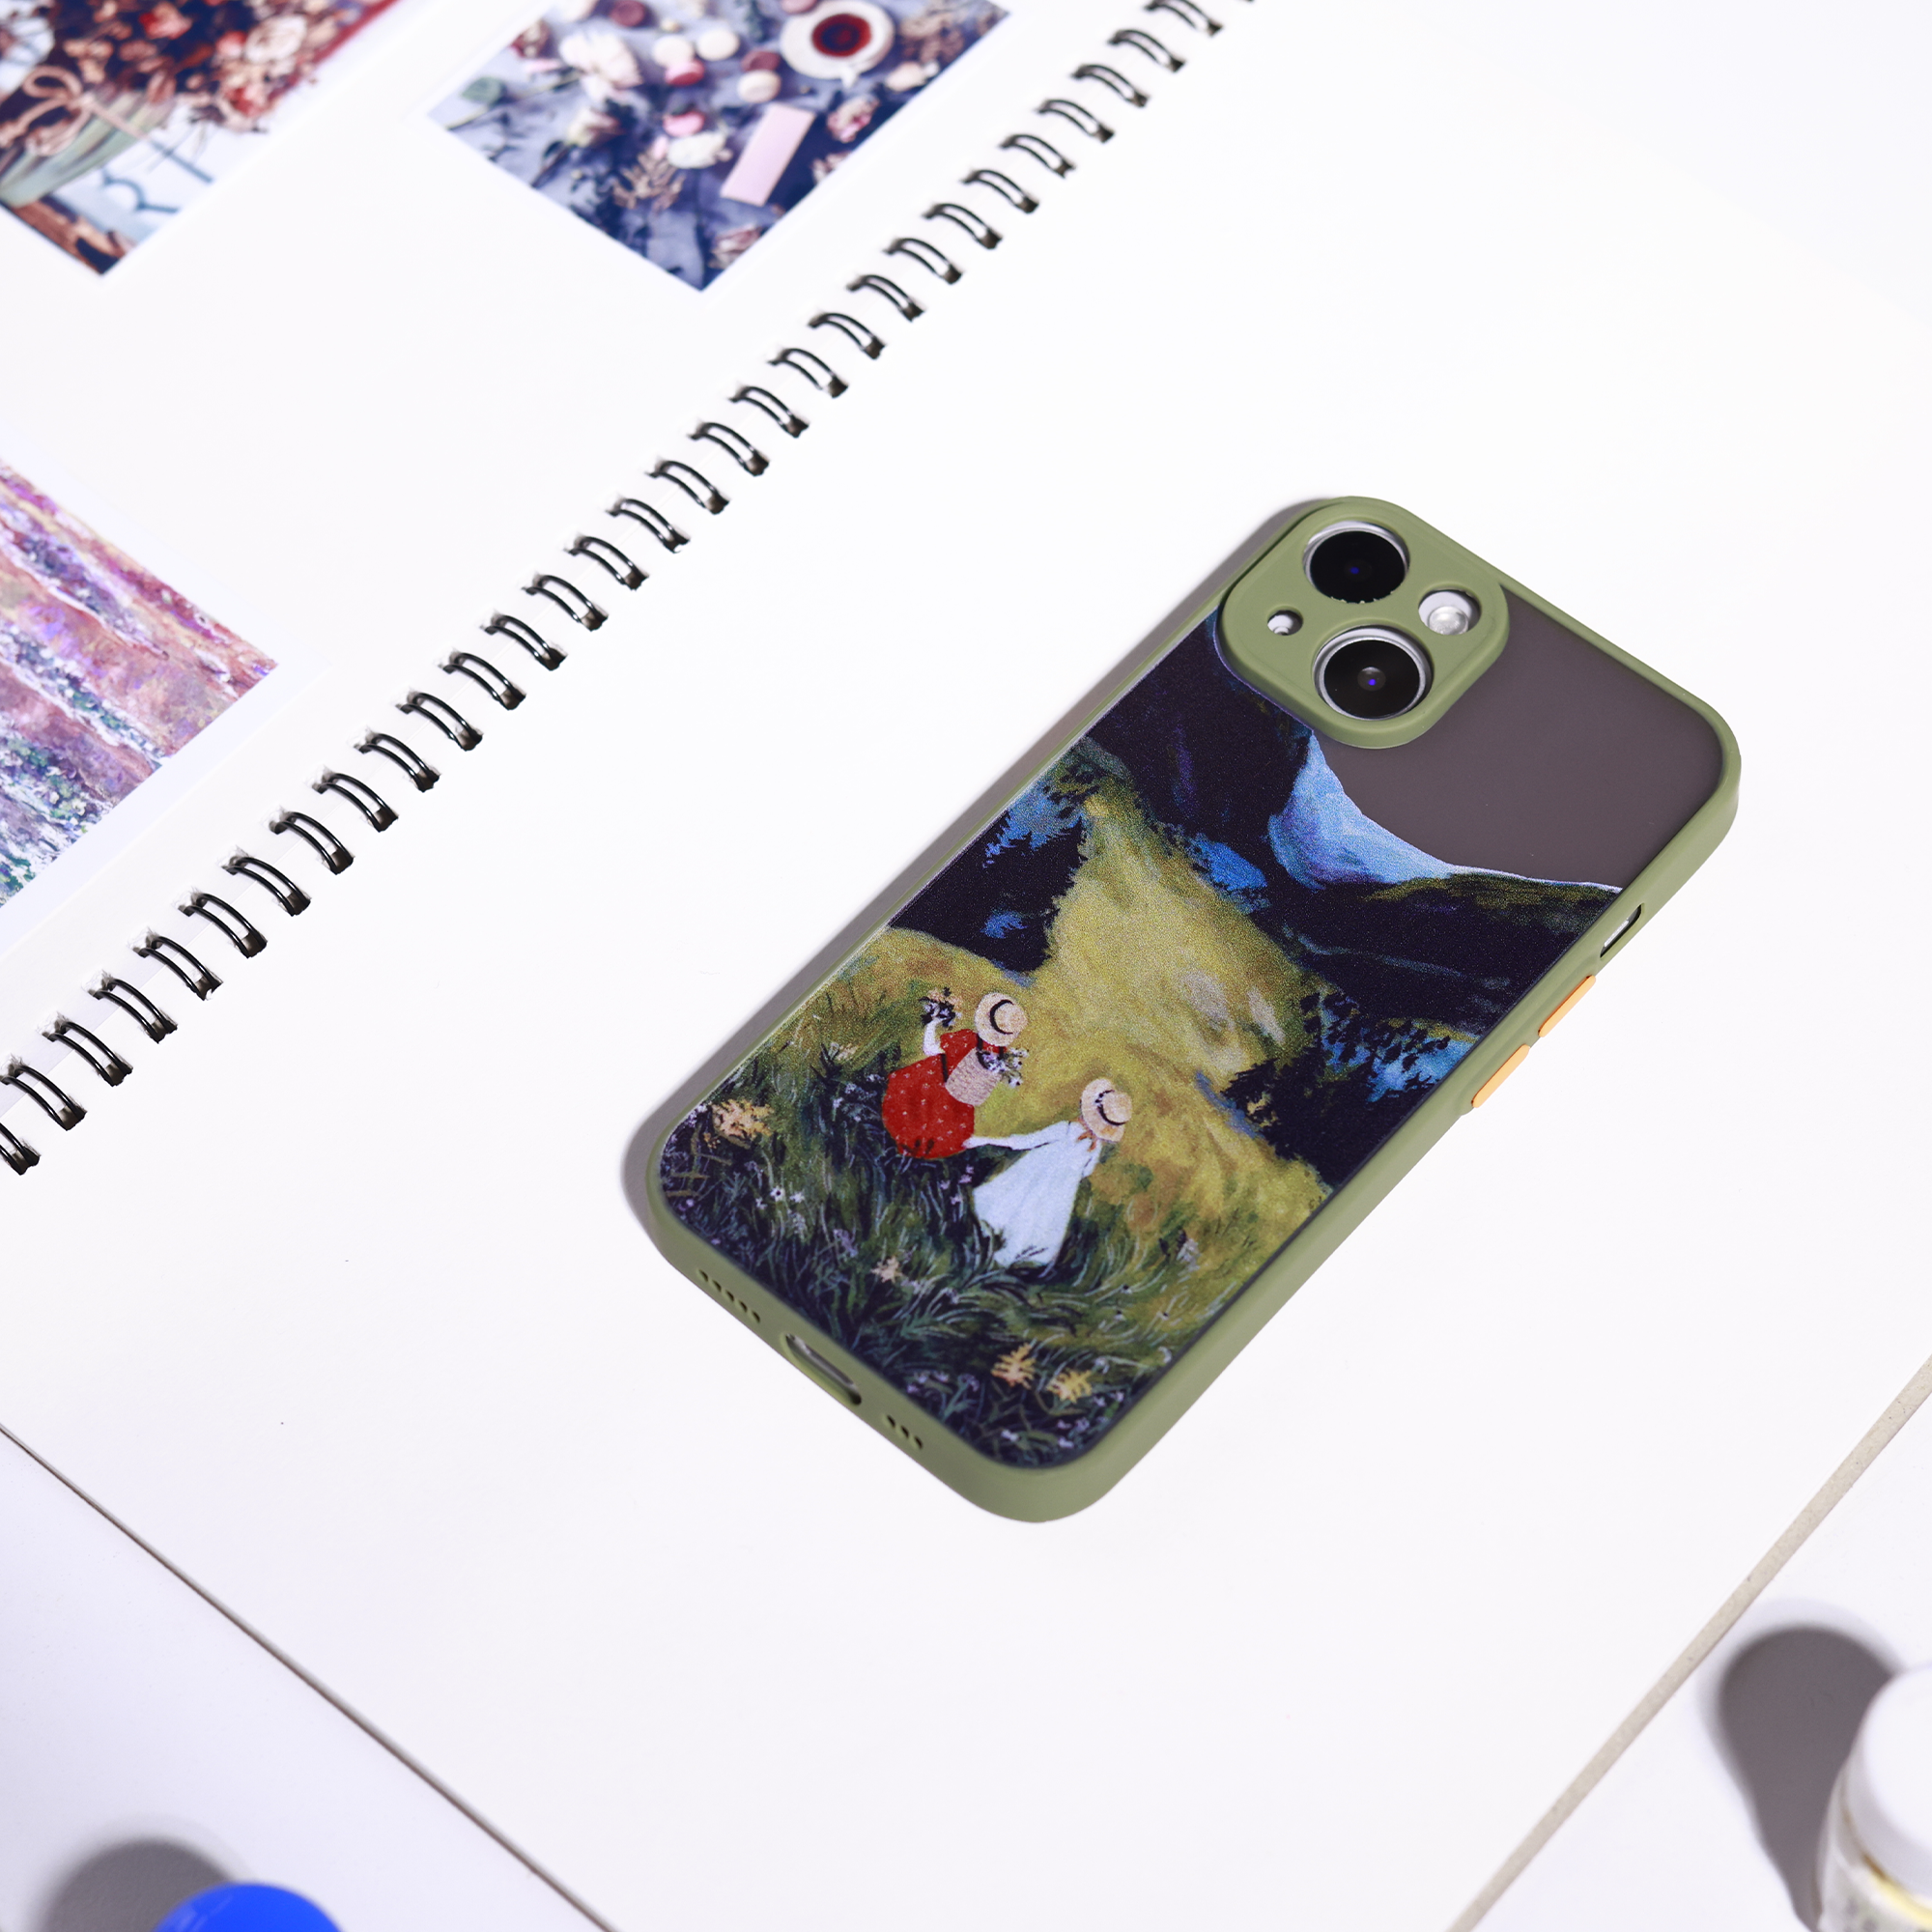 The Great Wave iPhone Case